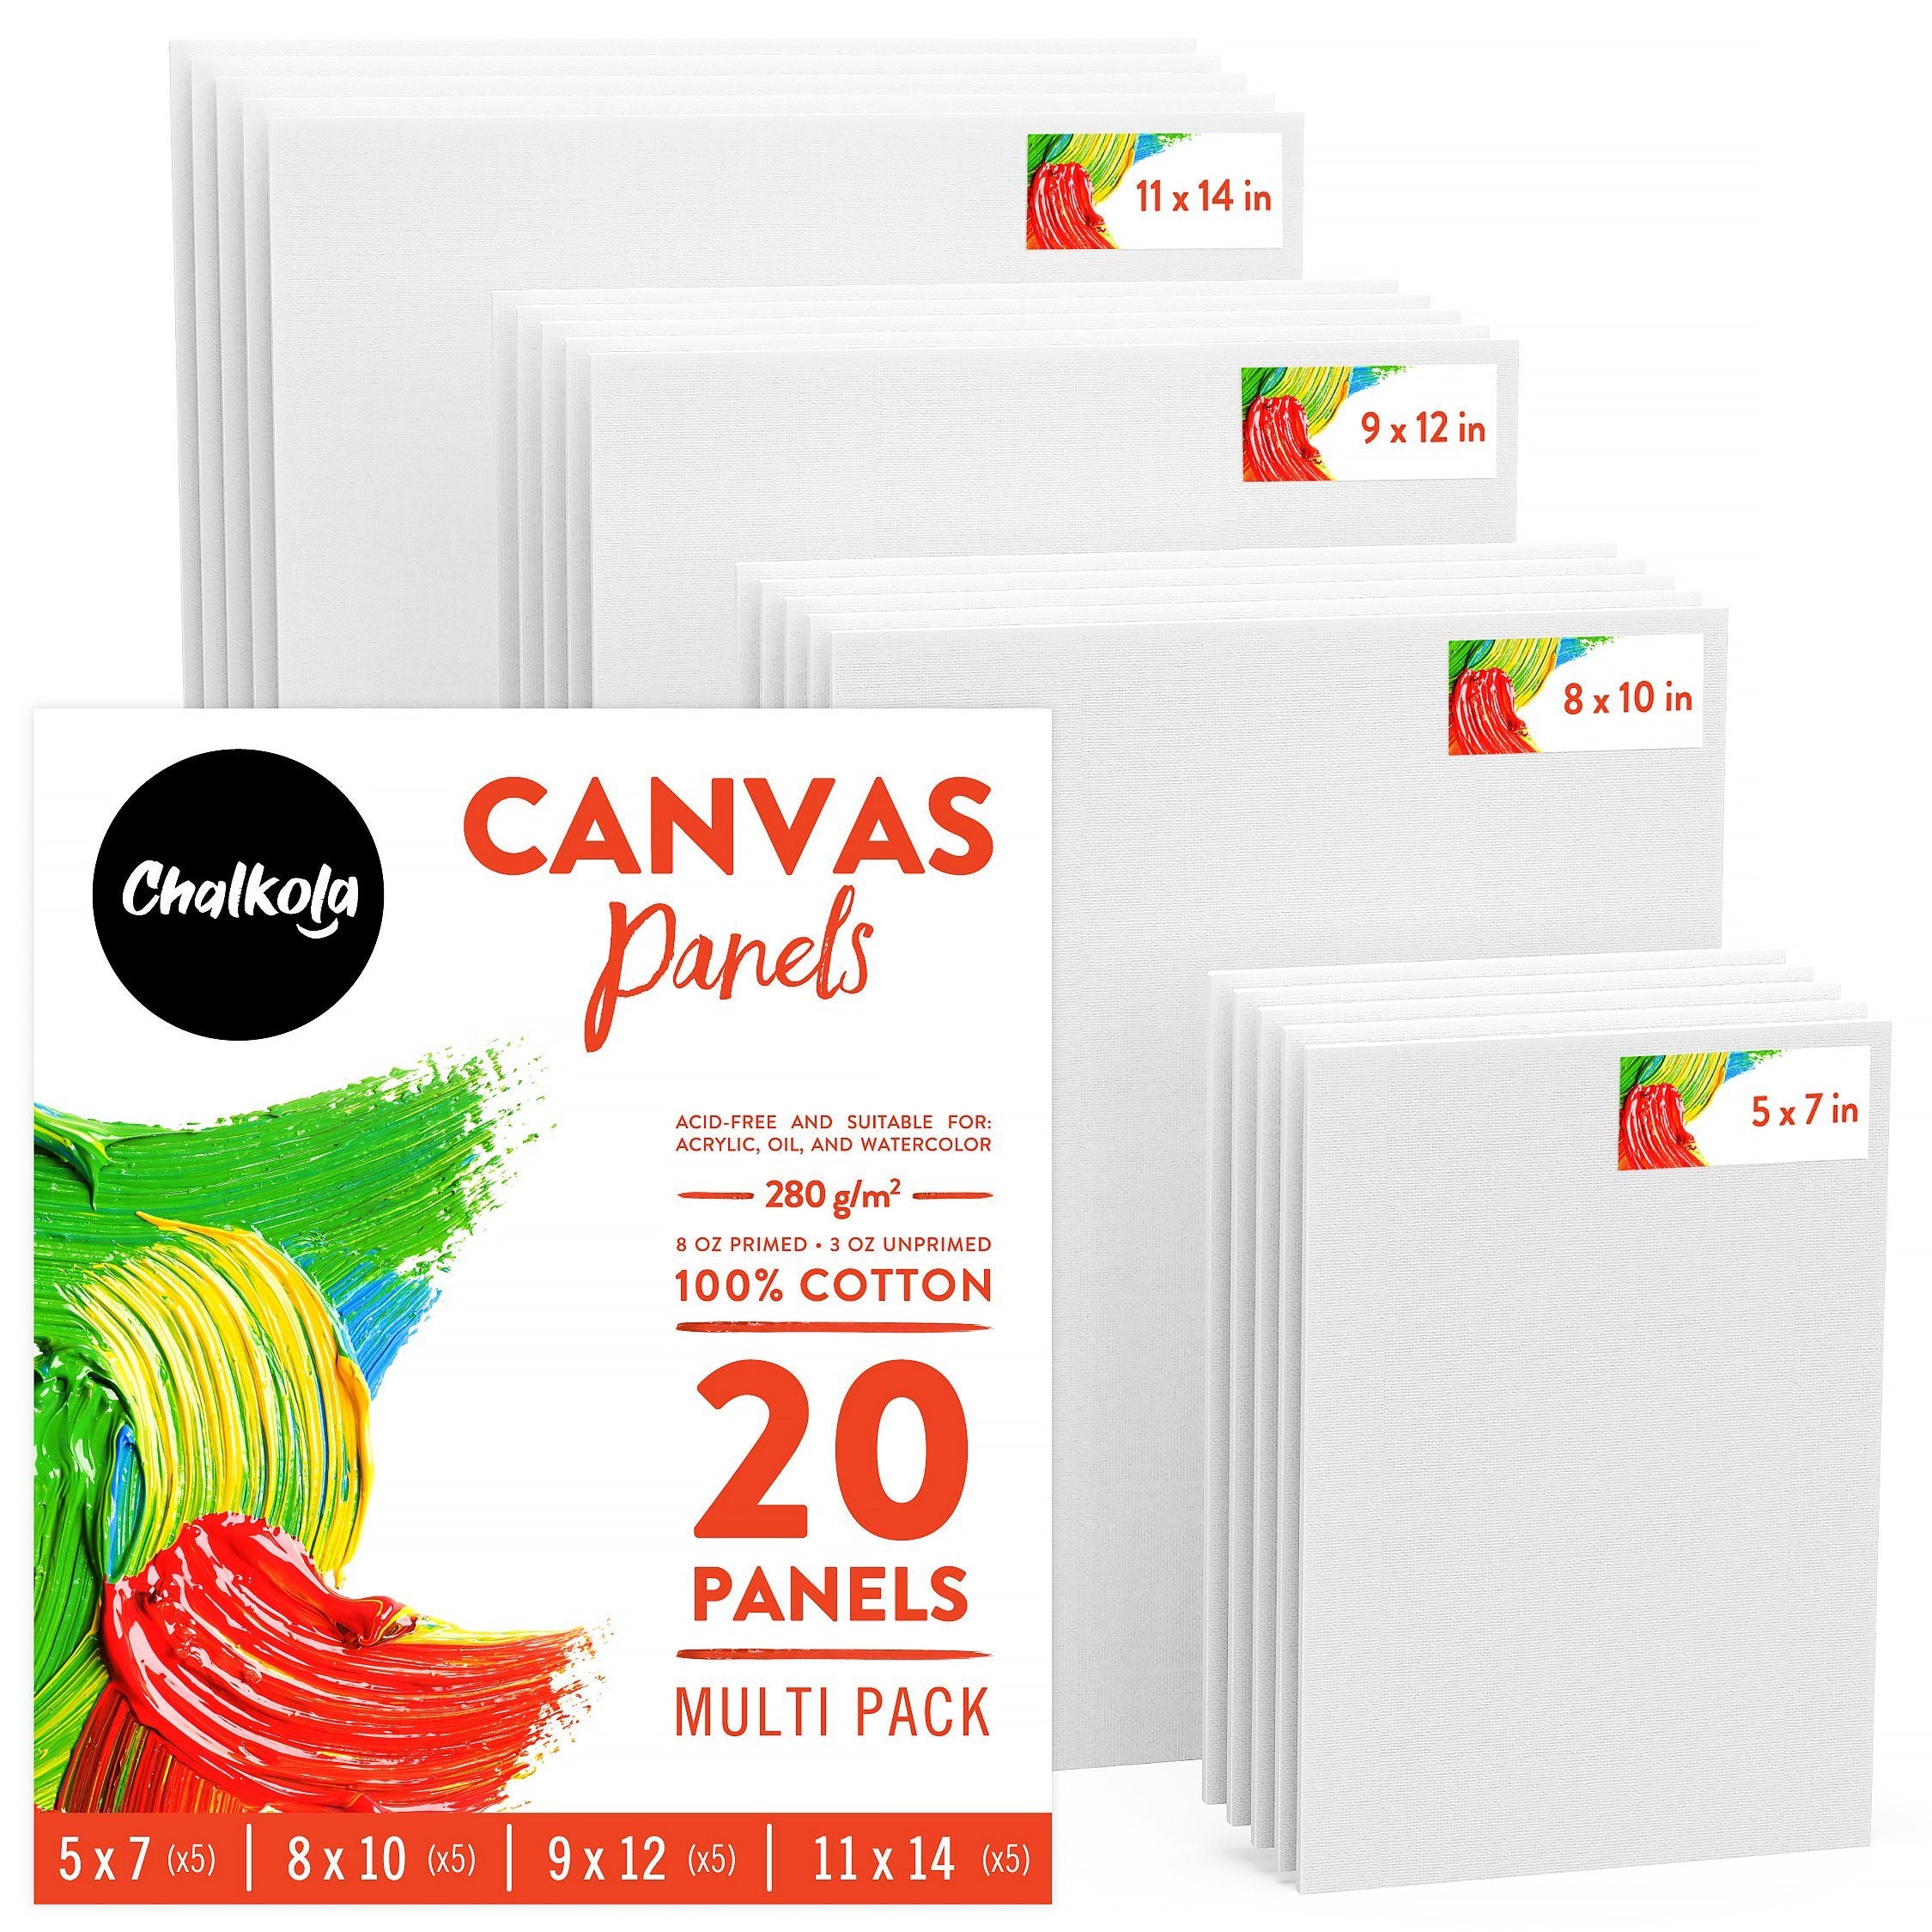 Artist Canvas Panel Blank Canvas Boards Primed Boards Painting Art 100%  Cotton